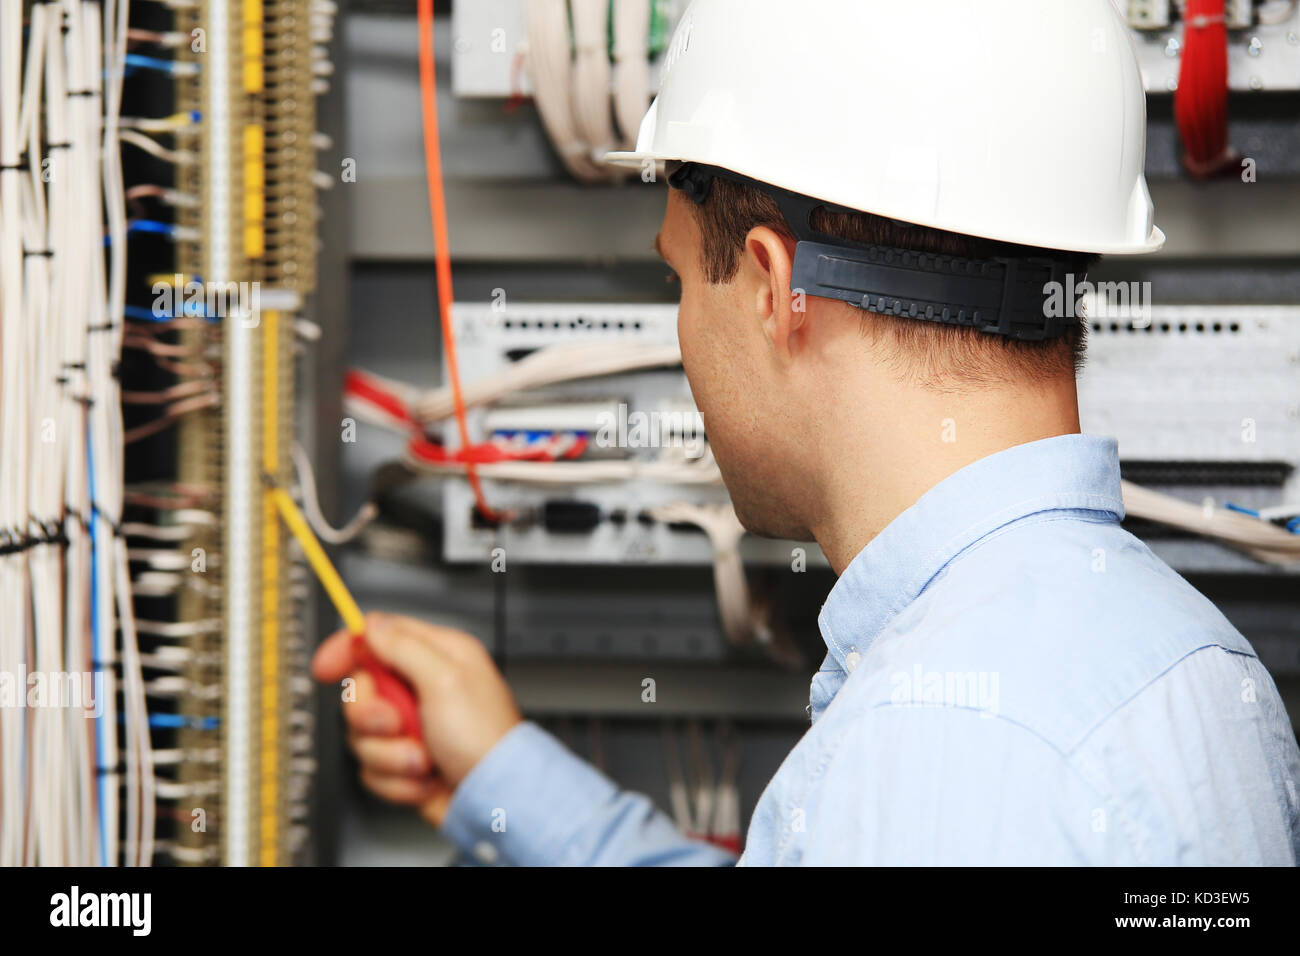 Engineer with screwdriver checking wire connections. Young electrician at work. Stock Photo